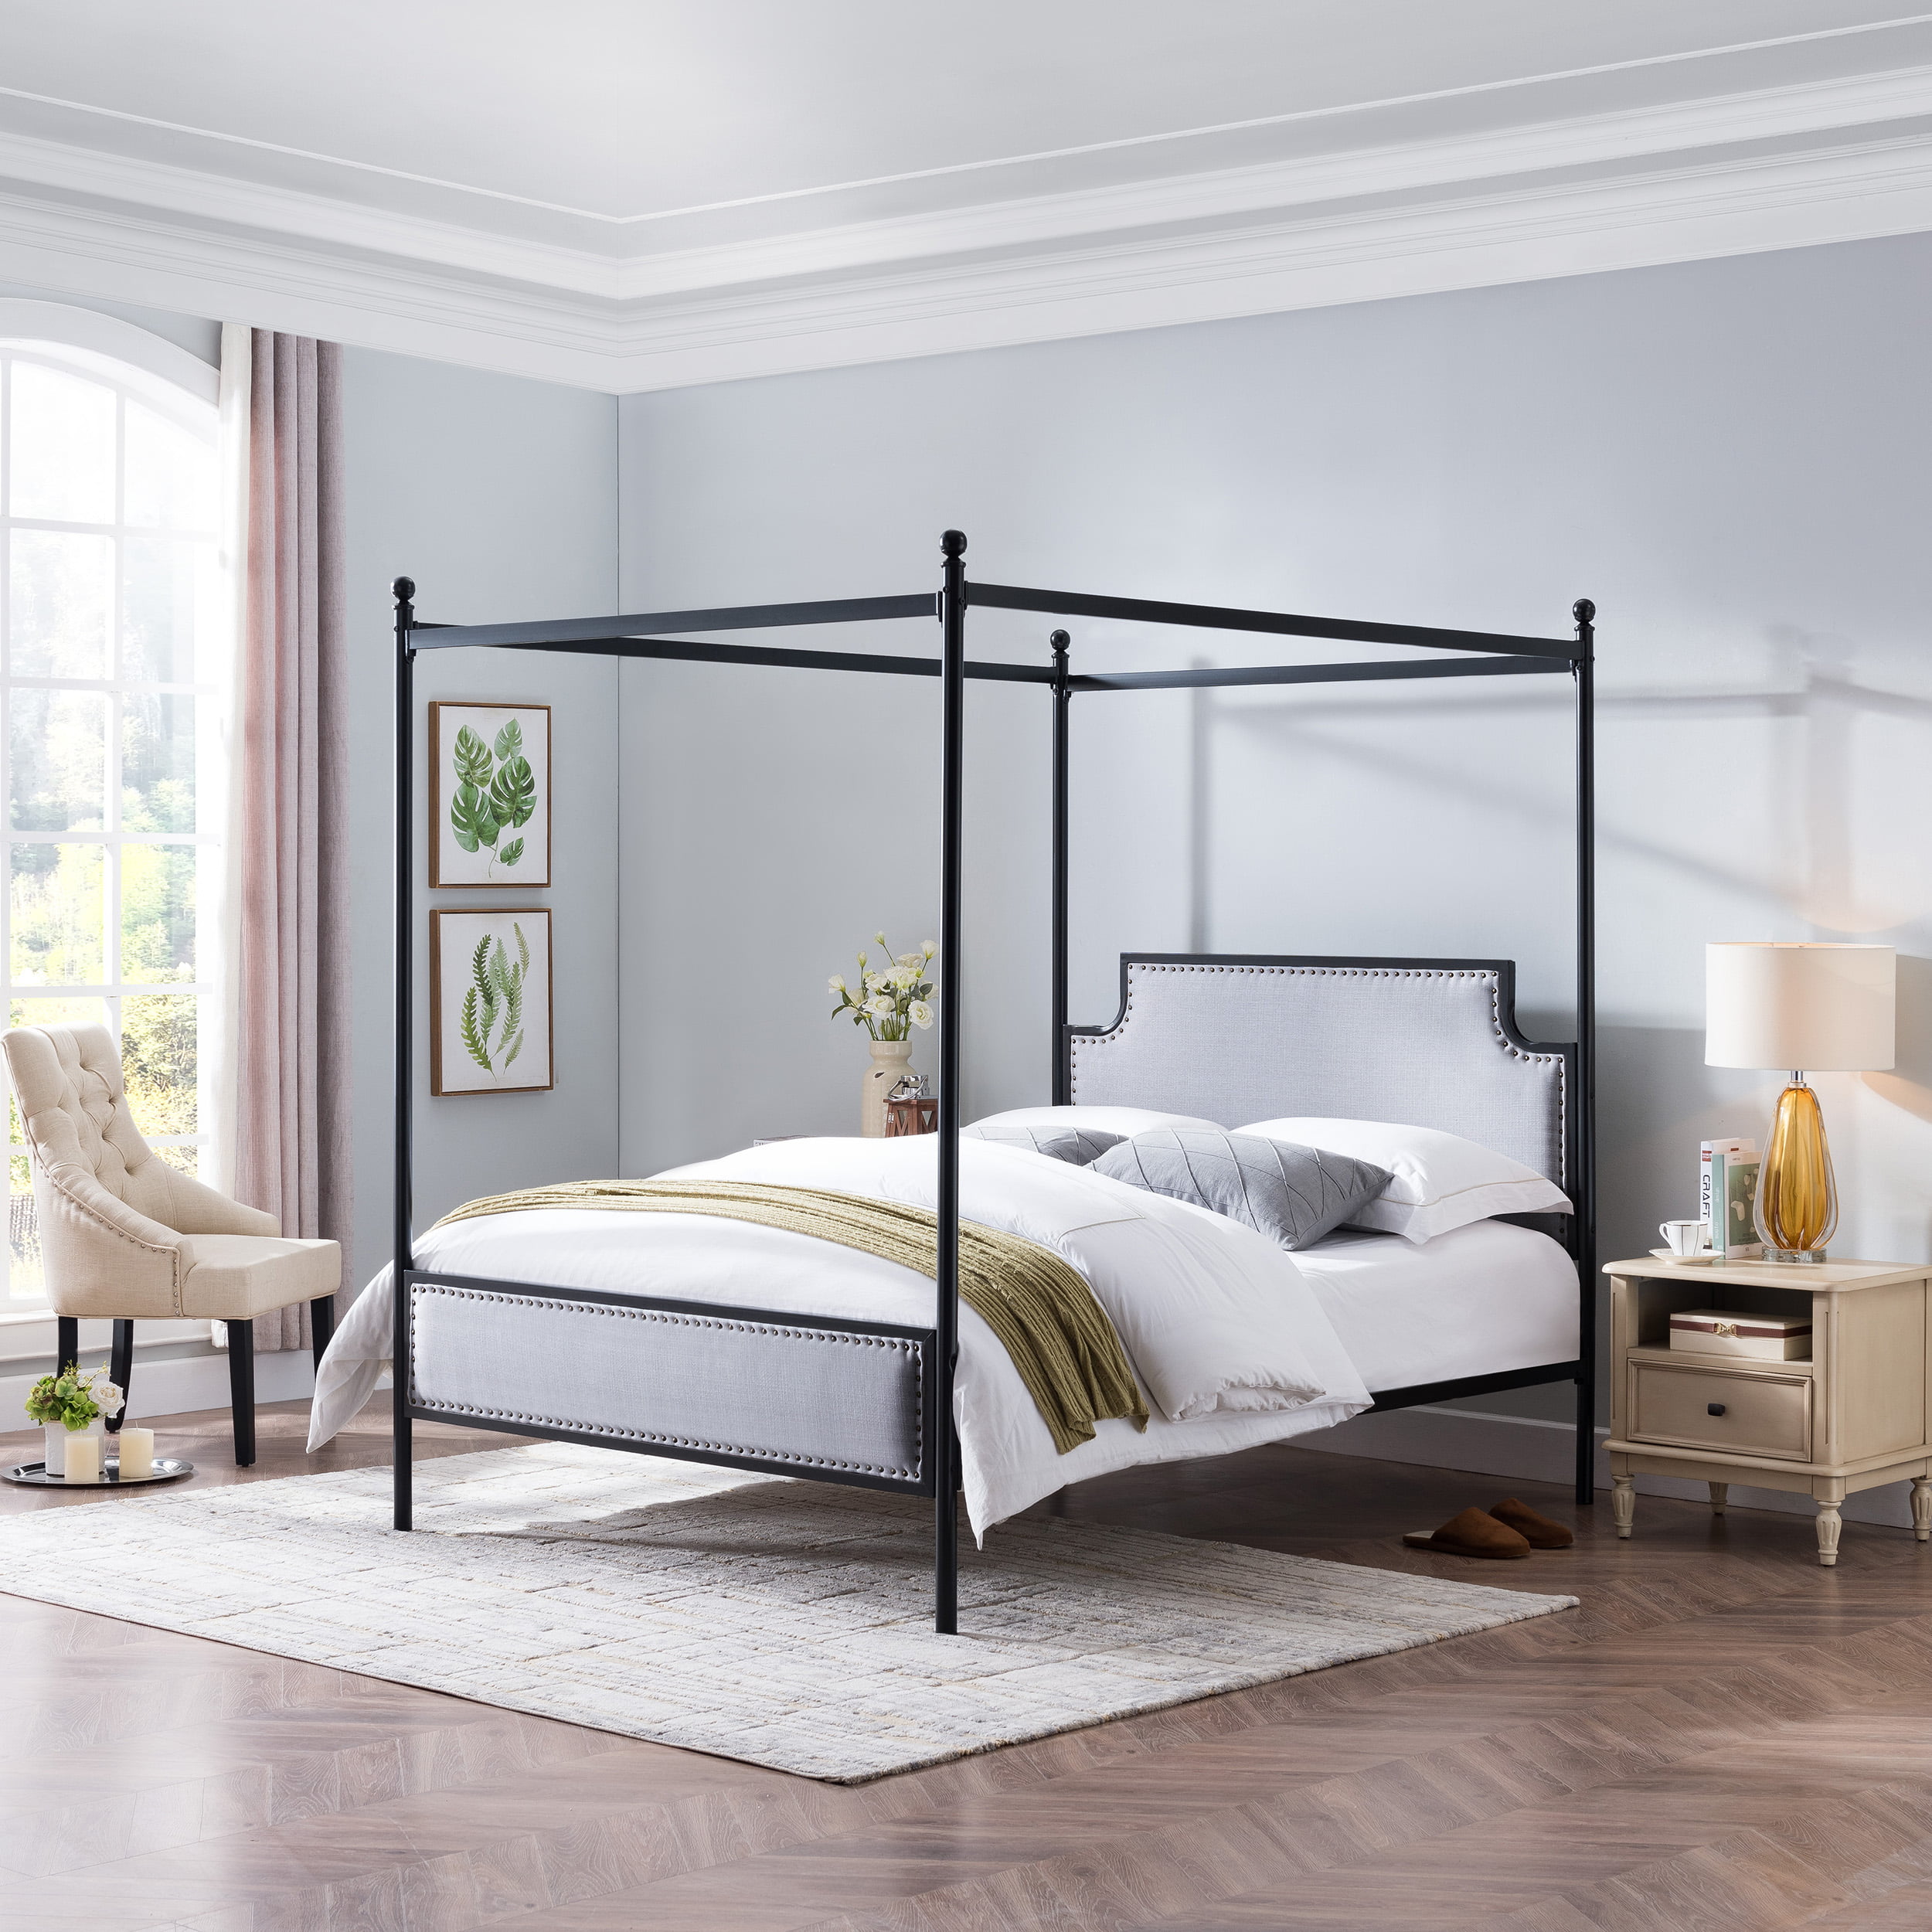 Iron Canopy Bed